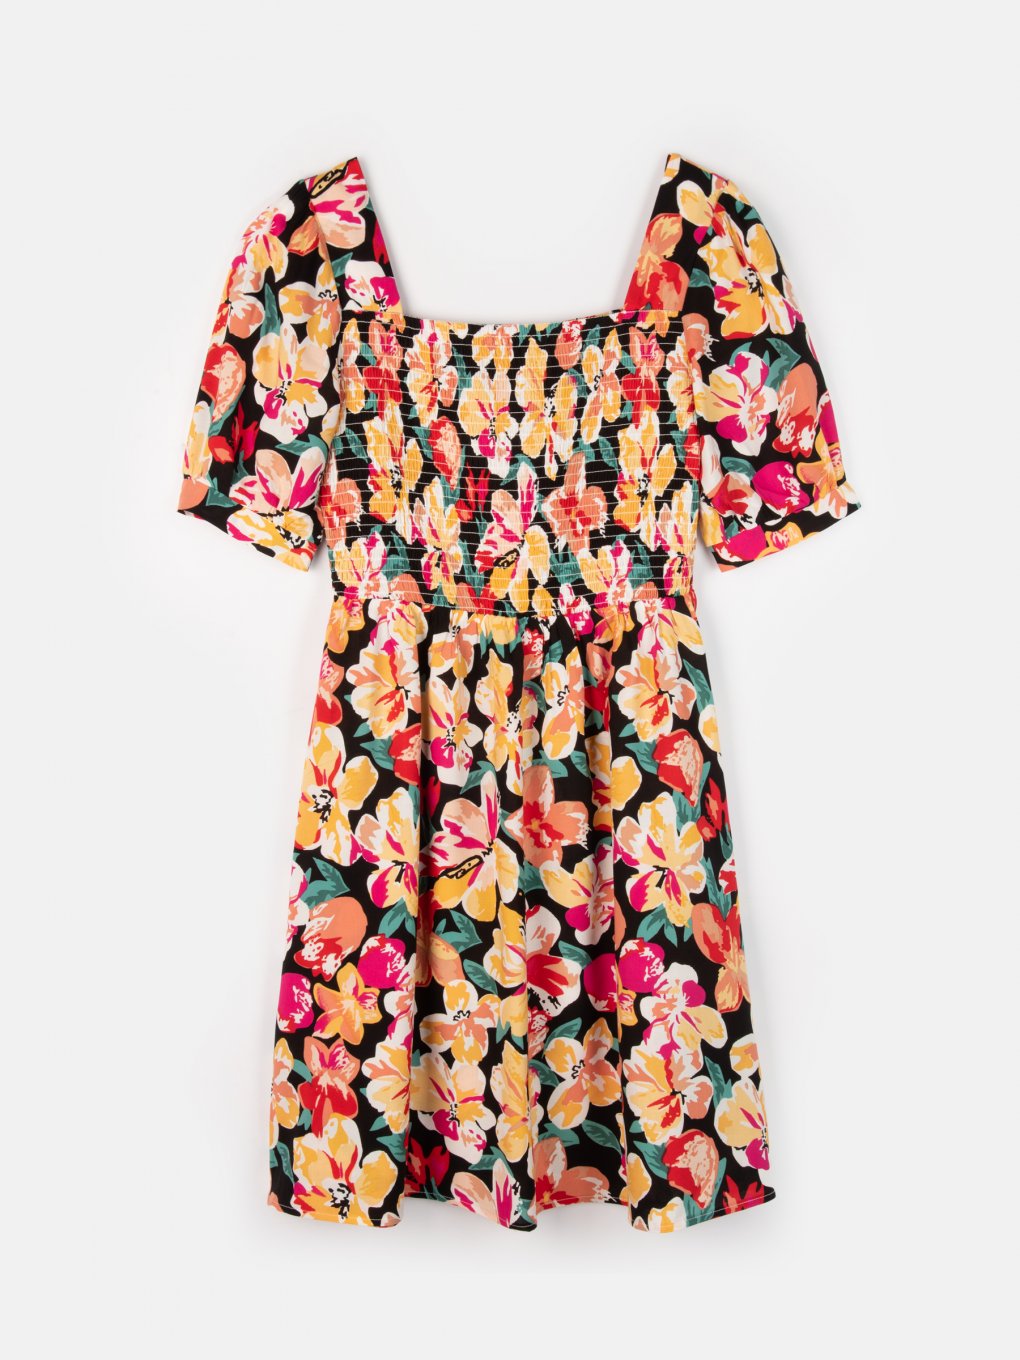 Floral dress with shirred top